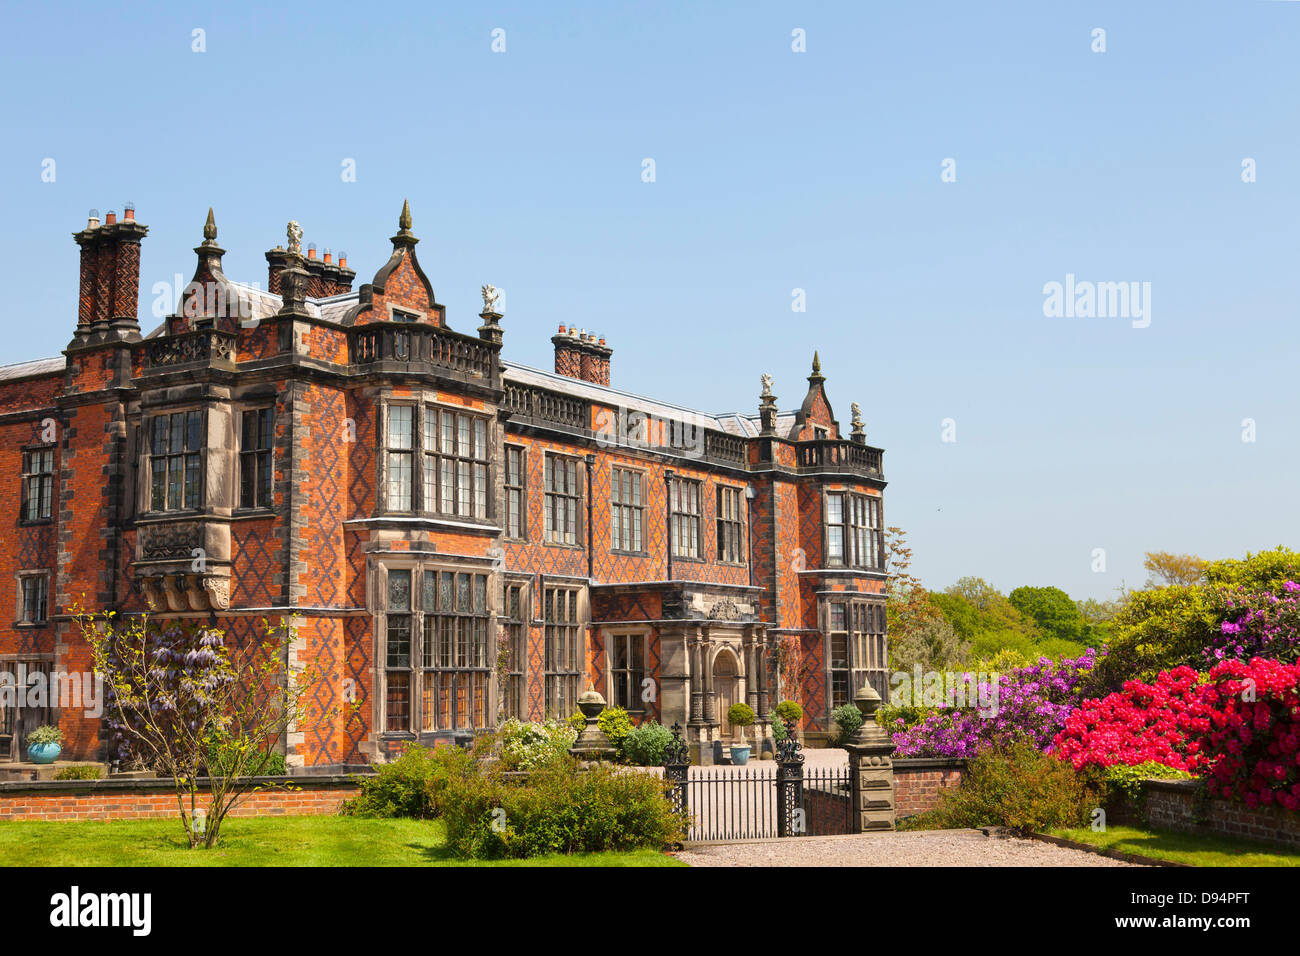 Historic Elizabethan mansion of an English stately home in Cheshire, England. Stock Photo